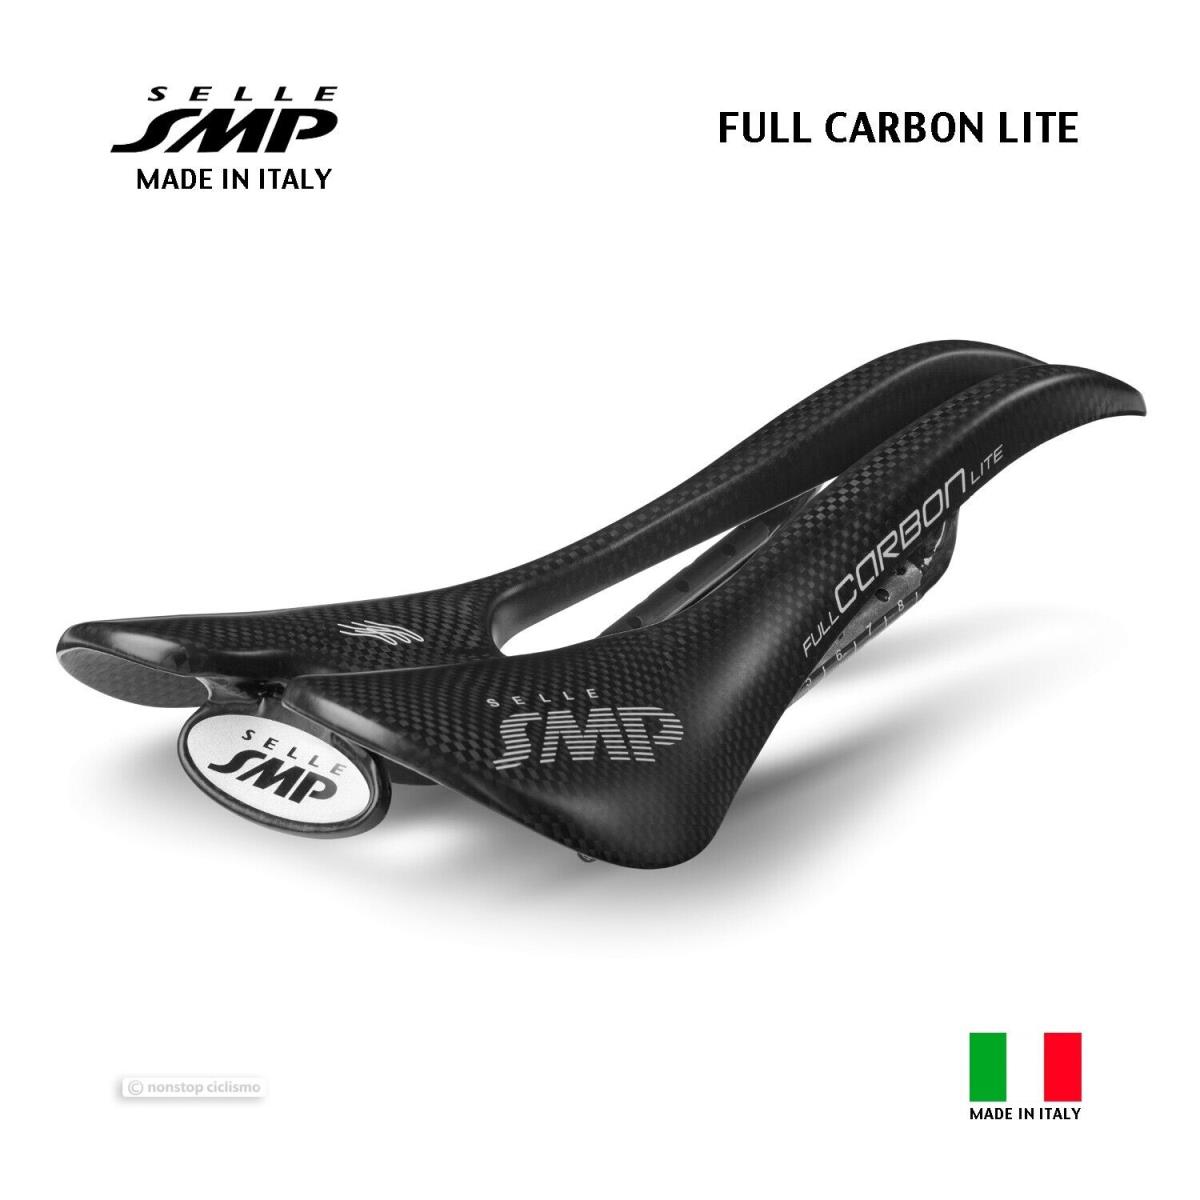 Selle Smp Full Carbon Lite Saddle - Made IN Italy